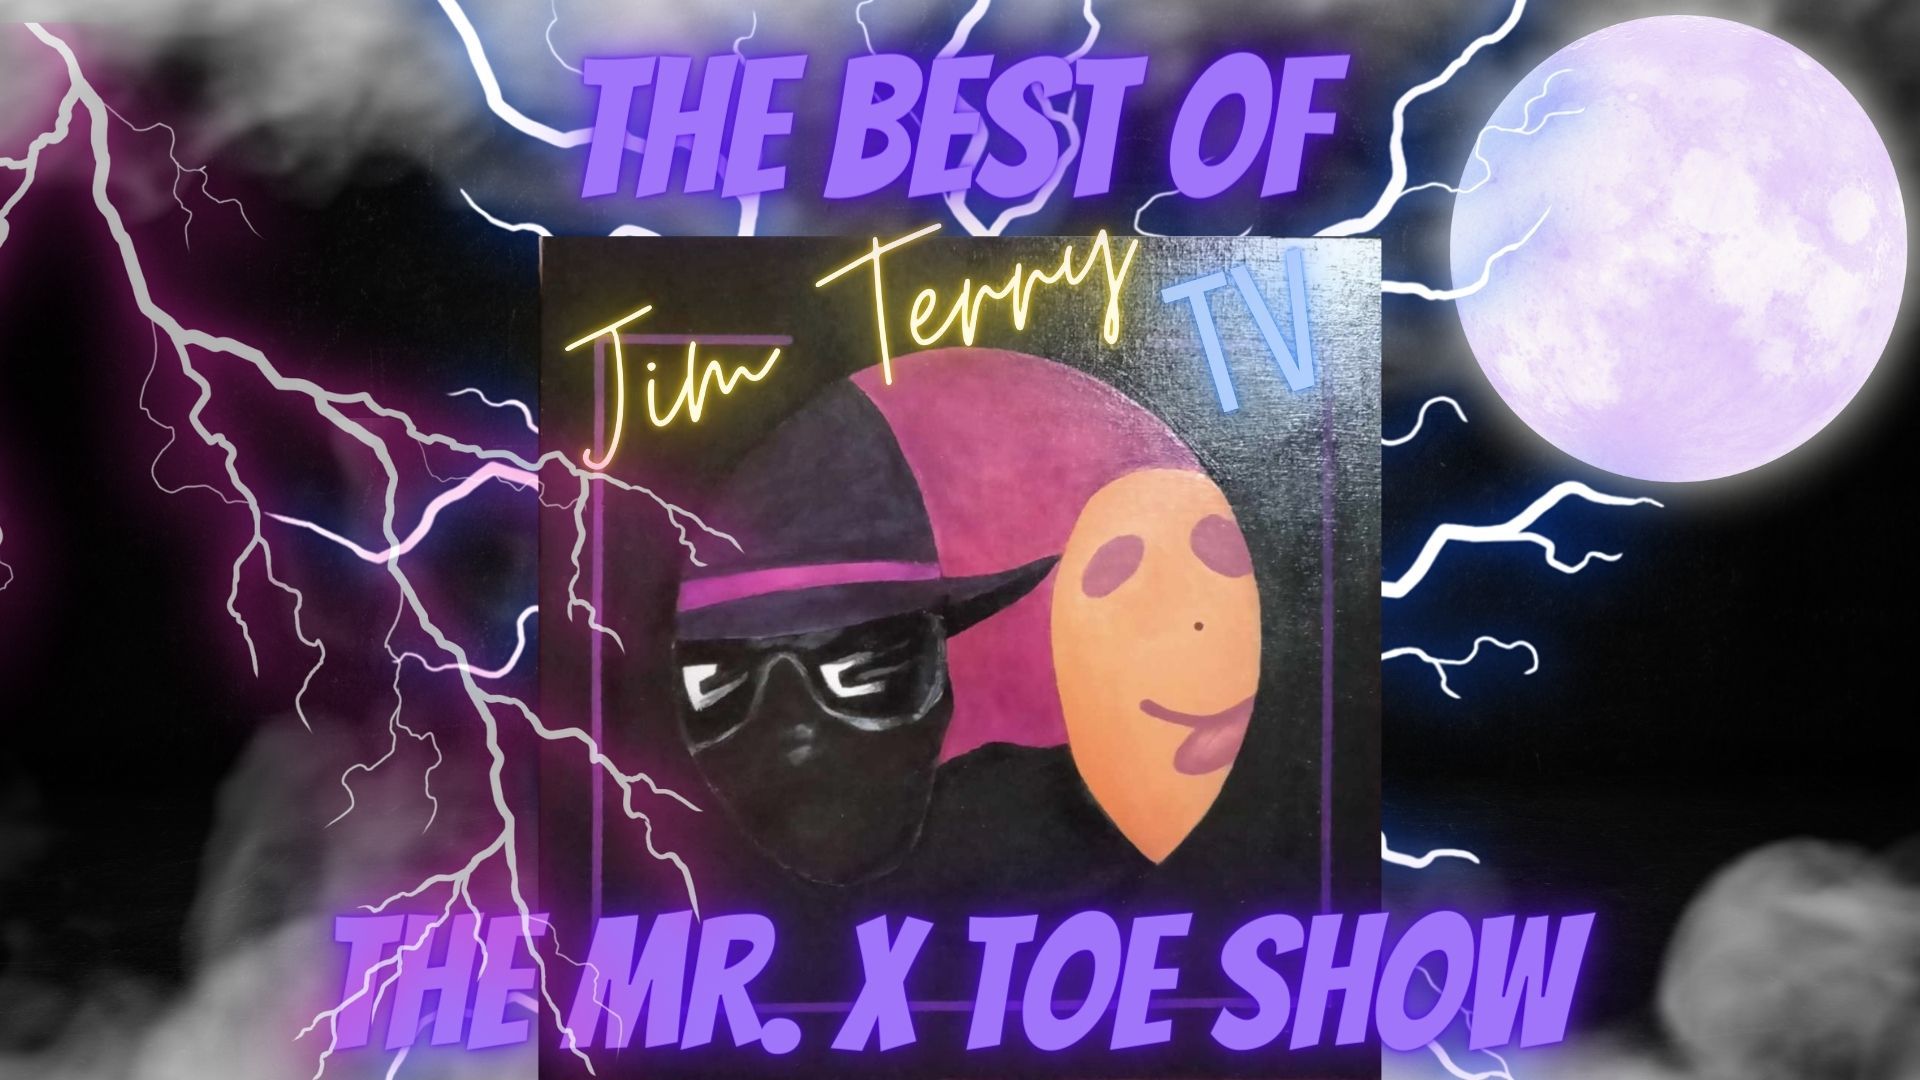 Best of JTTV: The Mr. X Toe Show (One Night Only!)